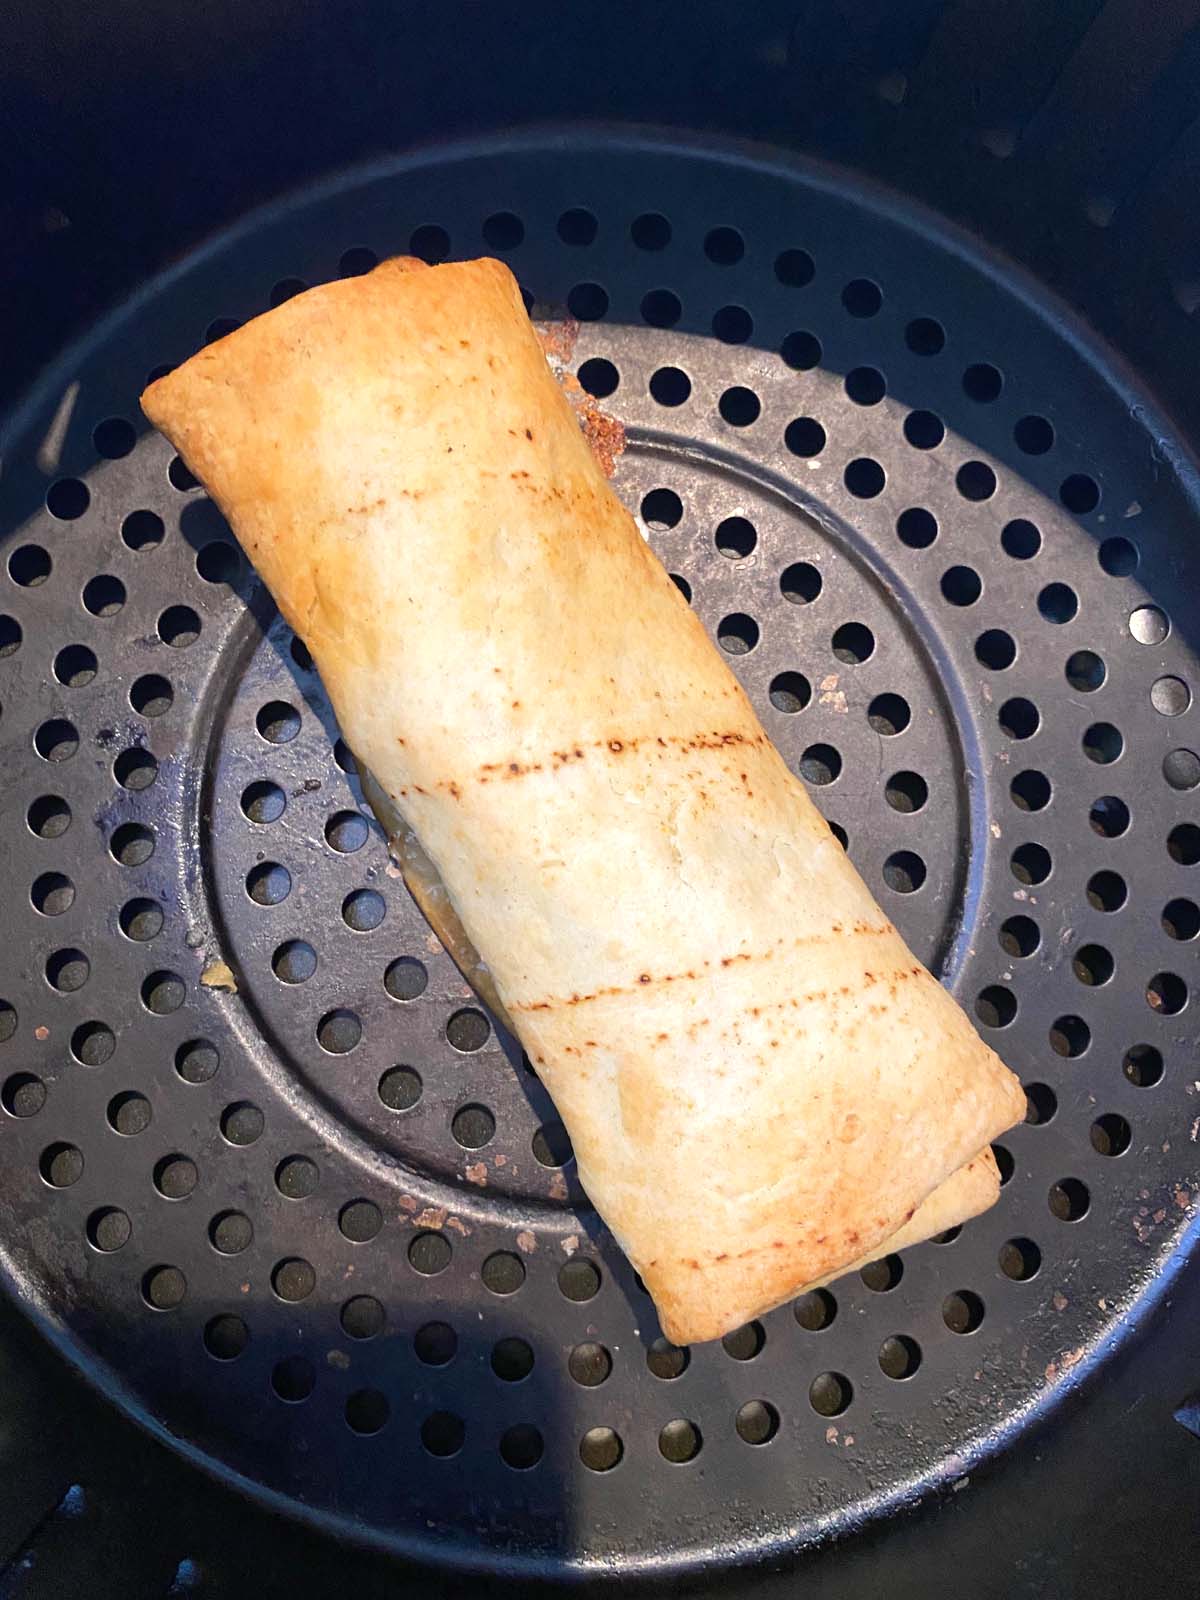 Air Fryer Chimichangas with Spicy Queso